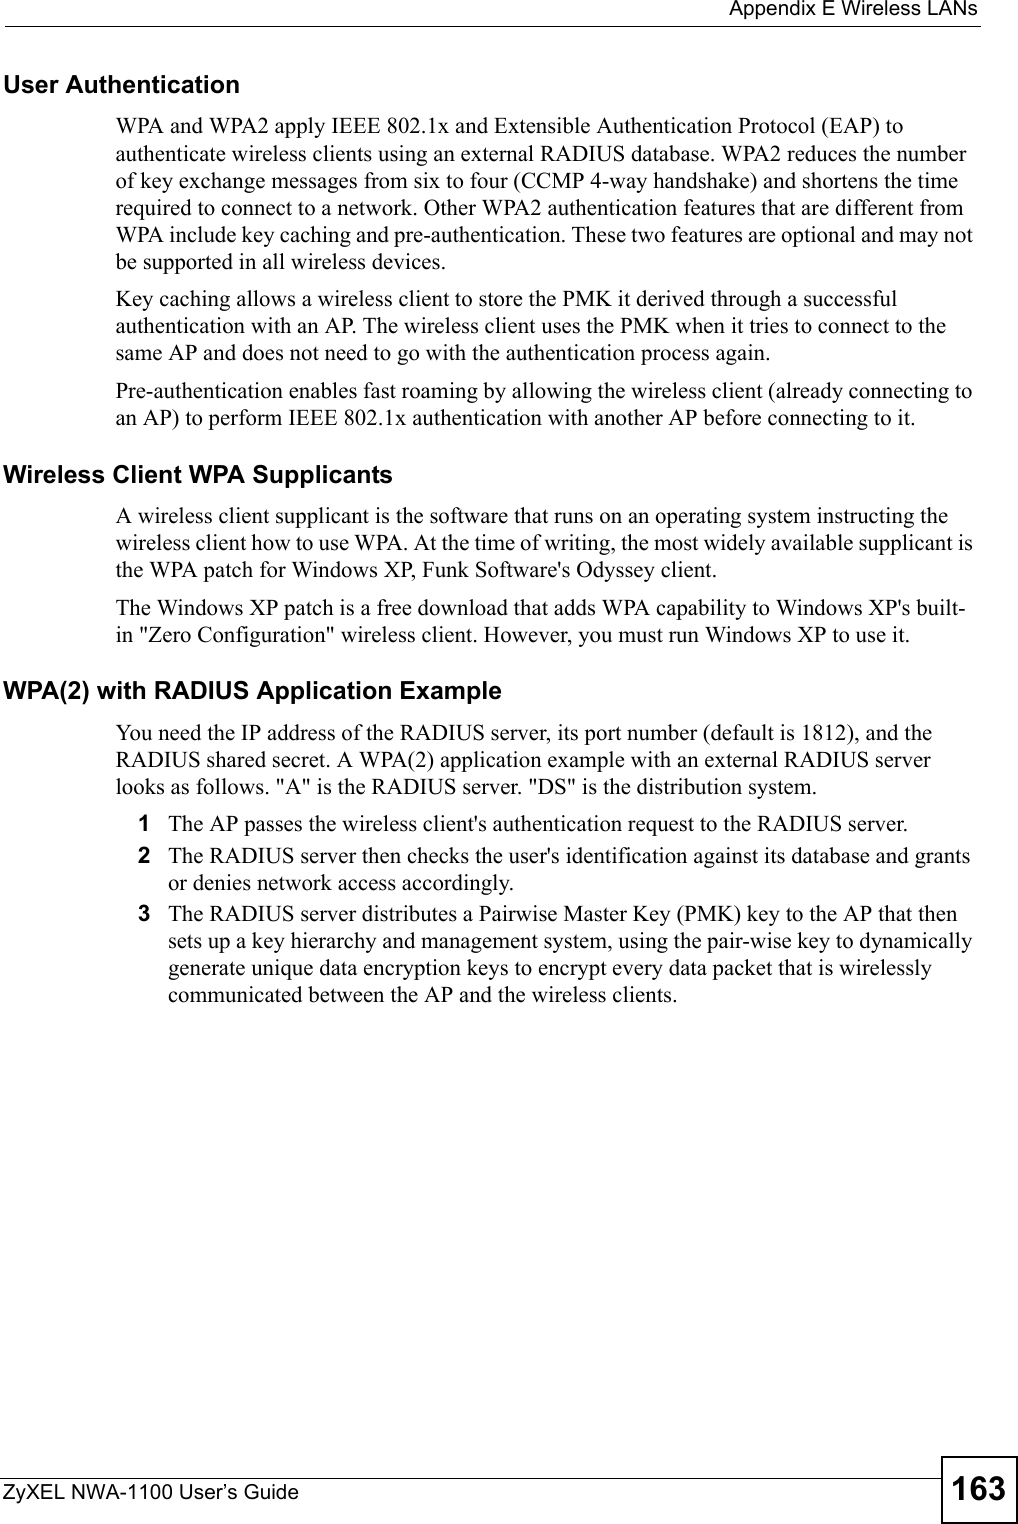  Appendix E Wireless LANsZyXEL NWA-1100 User’s Guide 163User Authentication WPA and WPA2 apply IEEE 802.1x and Extensible Authentication Protocol (EAP) to authenticate wireless clients using an external RADIUS database. WPA2 reduces the number of key exchange messages from six to four (CCMP 4-way handshake) and shortens the time required to connect to a network. Other WPA2 authentication features that are different from WPA include key caching and pre-authentication. These two features are optional and may not be supported in all wireless devices.Key caching allows a wireless client to store the PMK it derived through a successful authentication with an AP. The wireless client uses the PMK when it tries to connect to the same AP and does not need to go with the authentication process again.Pre-authentication enables fast roaming by allowing the wireless client (already connecting to an AP) to perform IEEE 802.1x authentication with another AP before connecting to it.Wireless Client WPA SupplicantsA wireless client supplicant is the software that runs on an operating system instructing the wireless client how to use WPA. At the time of writing, the most widely available supplicant is the WPA patch for Windows XP, Funk Software&apos;s Odyssey client. The Windows XP patch is a free download that adds WPA capability to Windows XP&apos;s built-in &quot;Zero Configuration&quot; wireless client. However, you must run Windows XP to use it. WPA(2) with RADIUS Application ExampleYou need the IP address of the RADIUS server, its port number (default is 1812), and the RADIUS shared secret. A WPA(2) application example with an external RADIUS server looks as follows. &quot;A&quot; is the RADIUS server. &quot;DS&quot; is the distribution system.1The AP passes the wireless client&apos;s authentication request to the RADIUS server.2The RADIUS server then checks the user&apos;s identification against its database and grants or denies network access accordingly.3The RADIUS server distributes a Pairwise Master Key (PMK) key to the AP that then sets up a key hierarchy and management system, using the pair-wise key to dynamically generate unique data encryption keys to encrypt every data packet that is wirelessly communicated between the AP and the wireless clients.